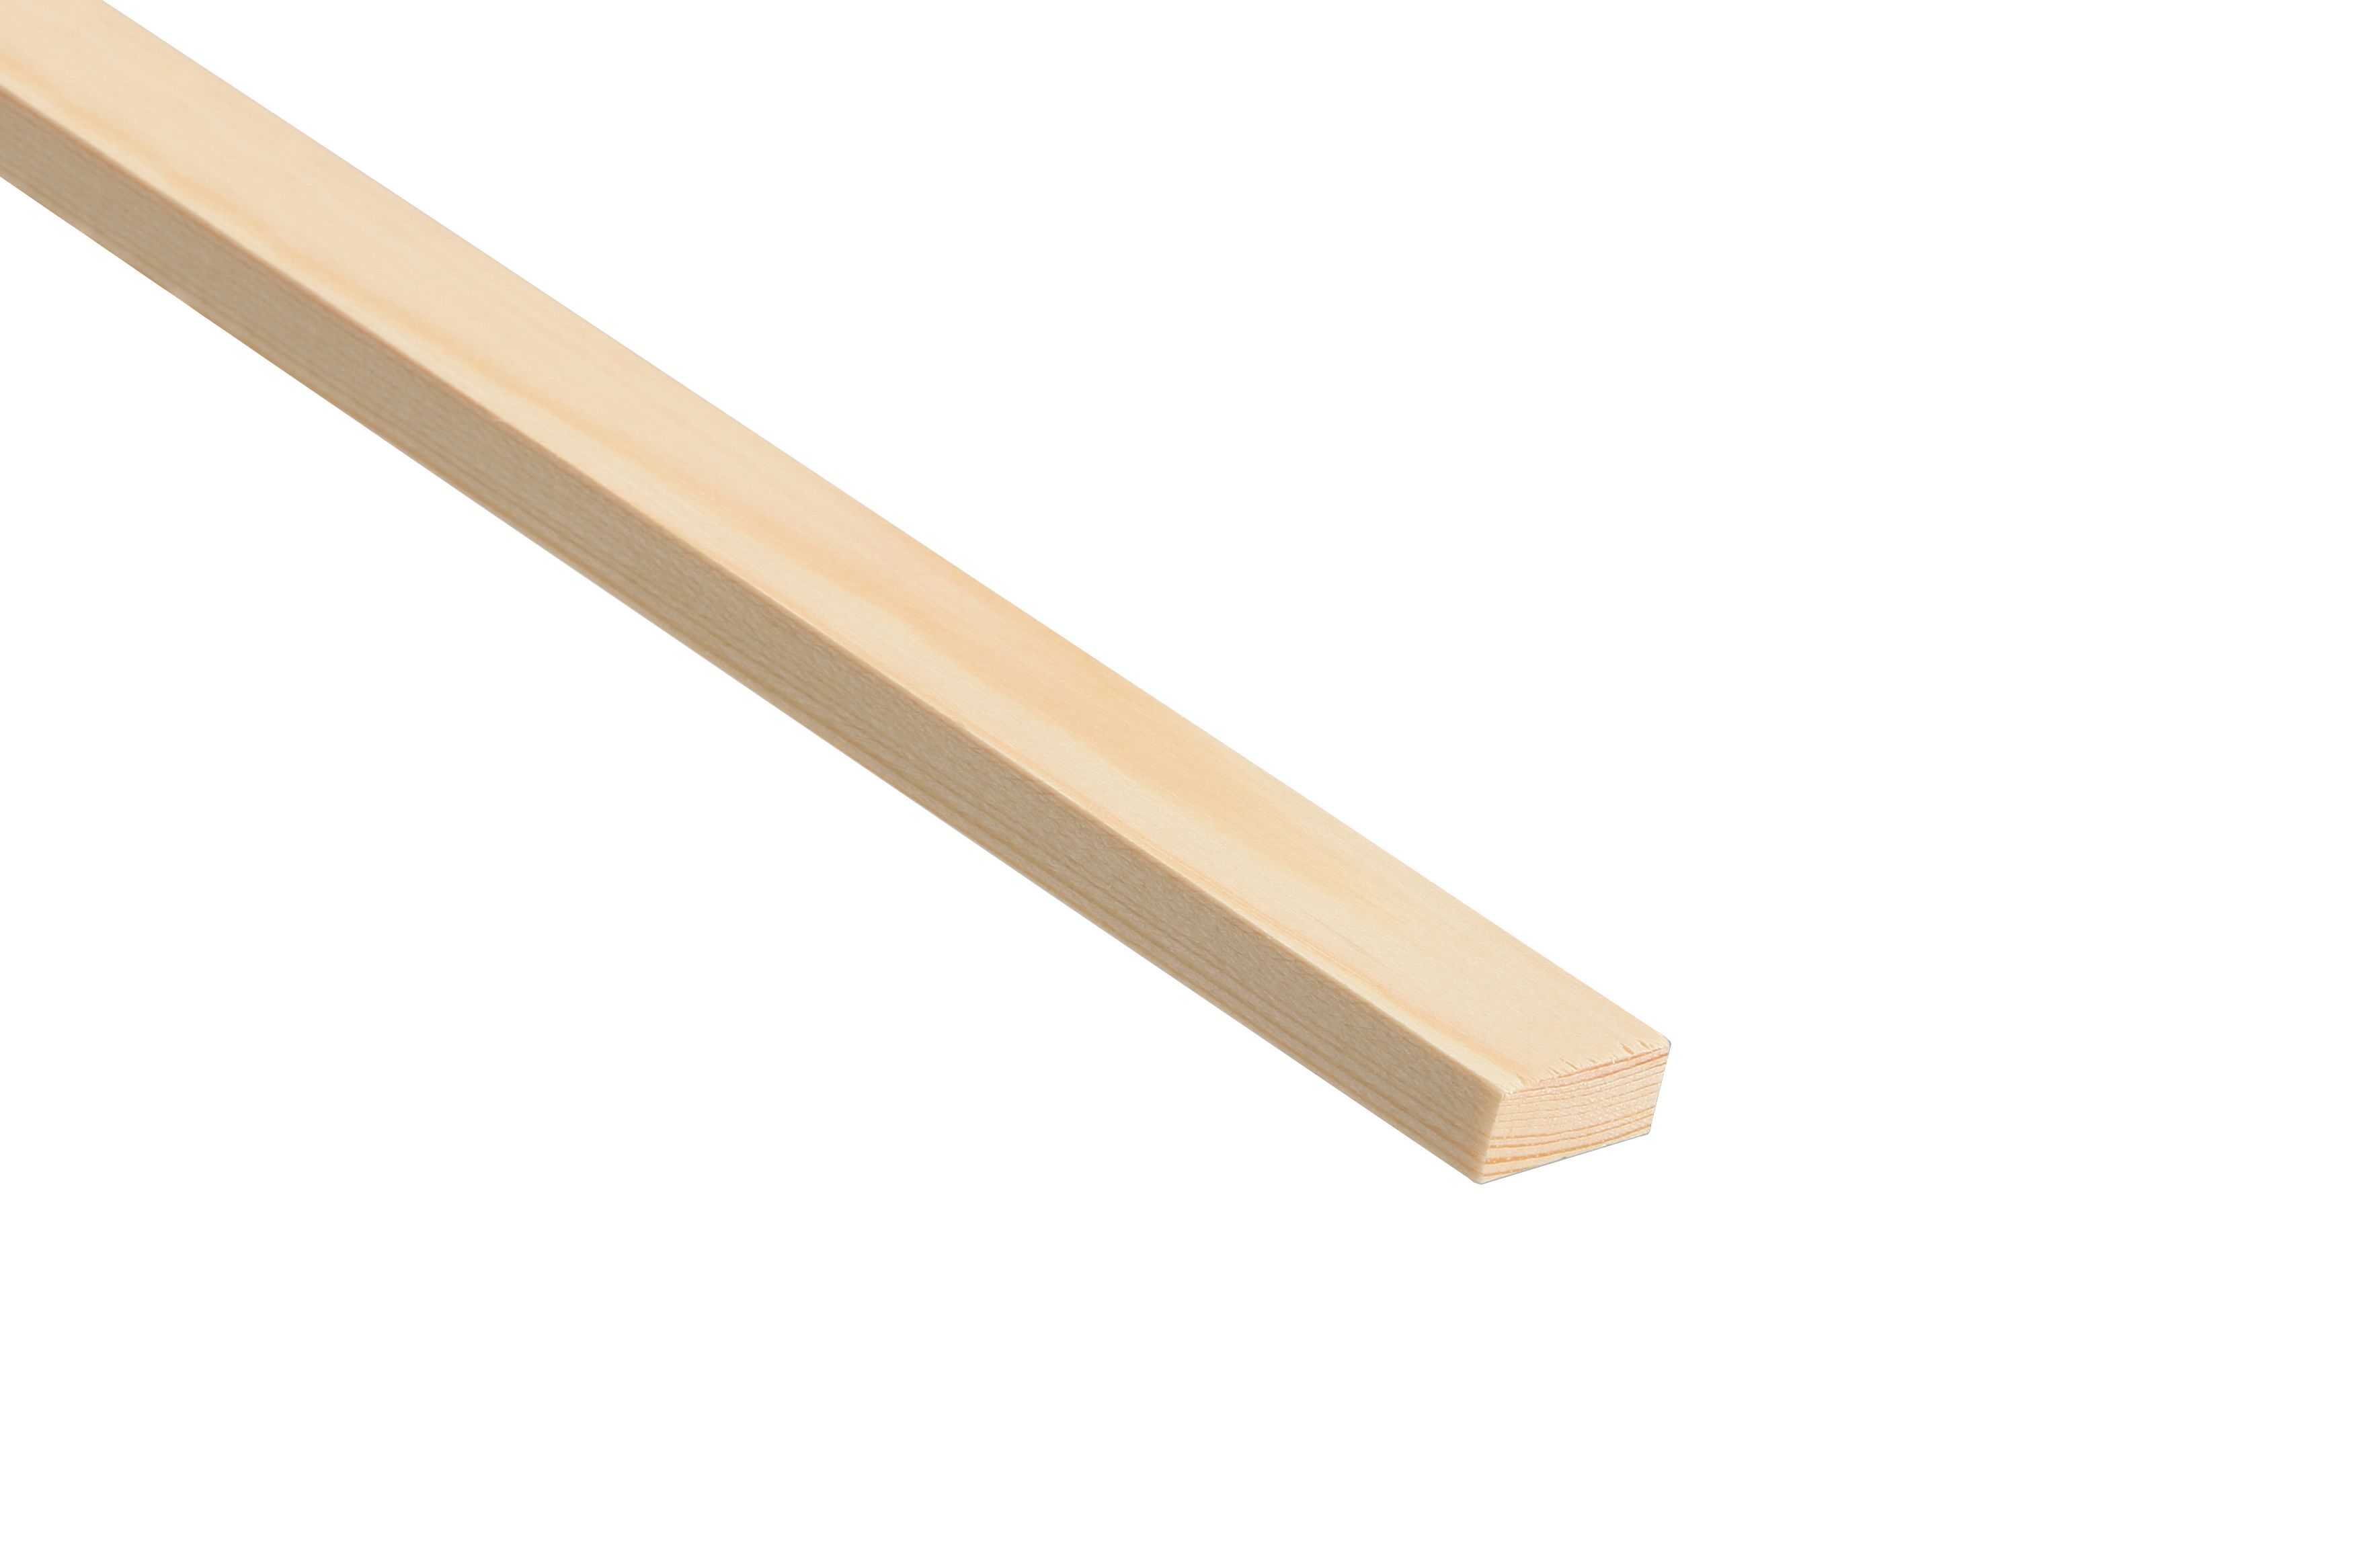 Image of Wickes Pine Stripwood Moulding (PSE) - 6 x 18 x 2400mm